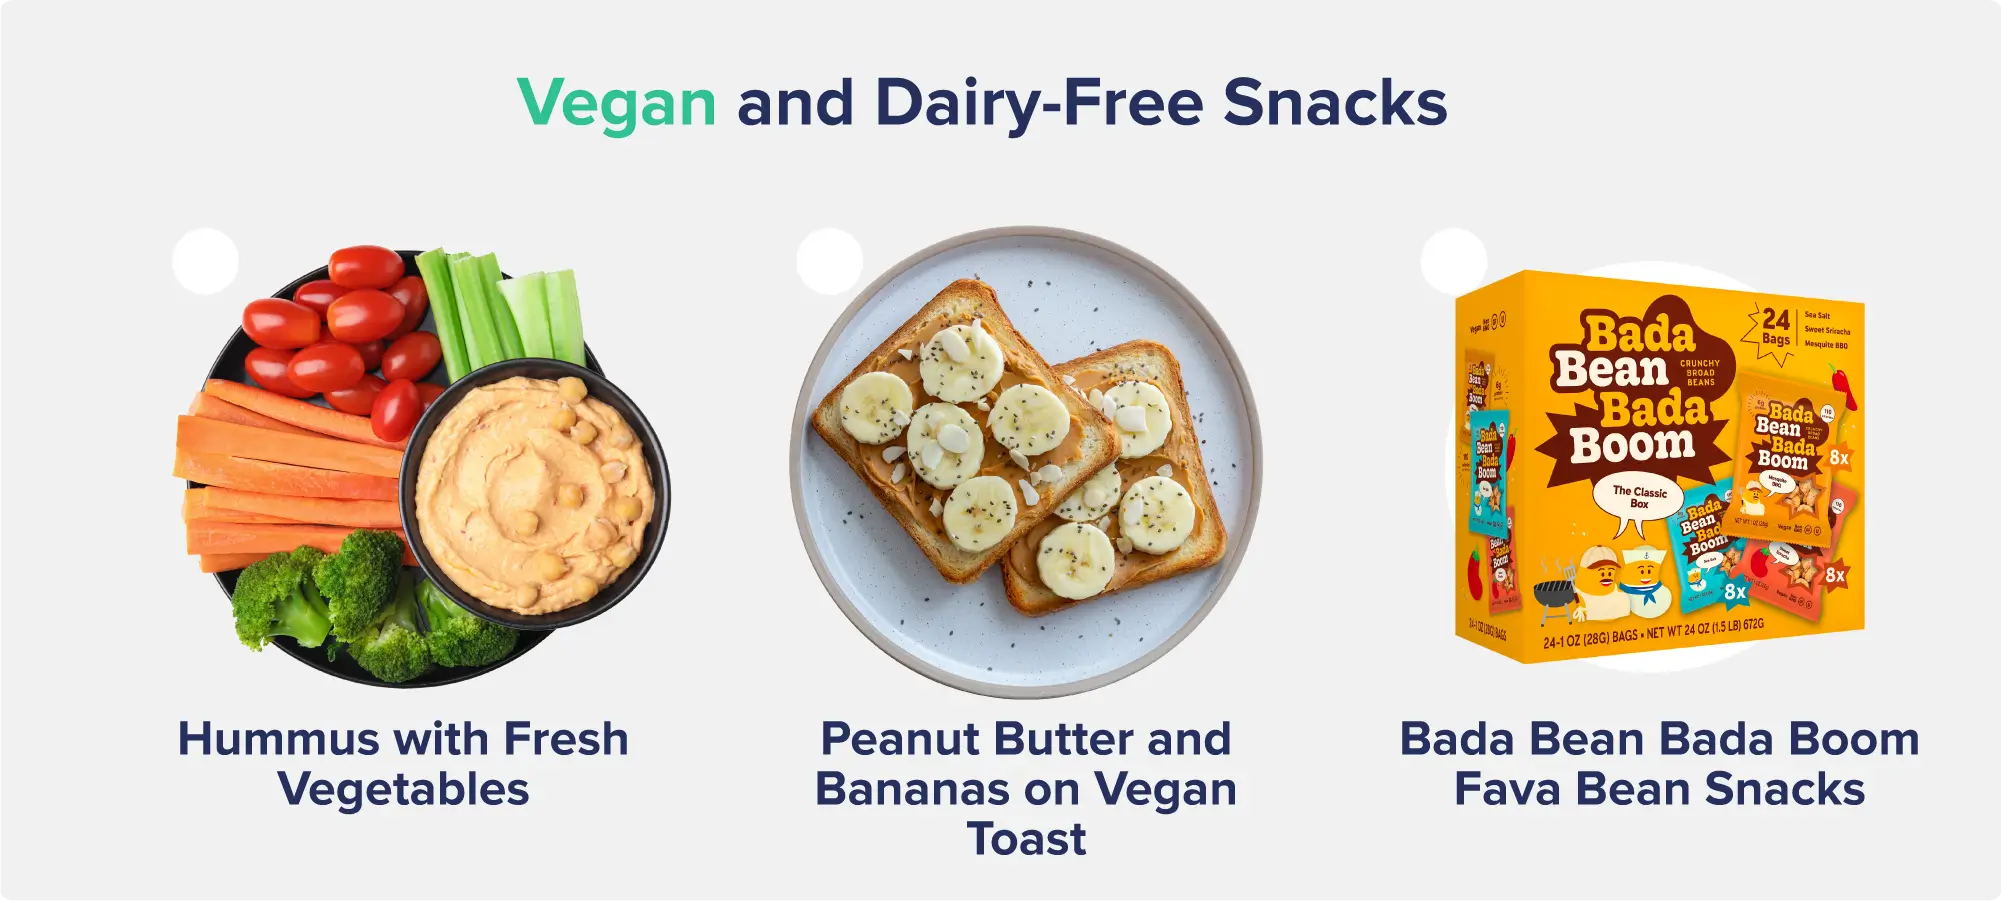 A graphic entitled "Vegan and Dairy-Free Snacks" depicting labeled images of a hummus and vegetable plate, peanut butter and bananas on vegan toast, and a box of Bada Bean Bada Boom fava bean snacks.